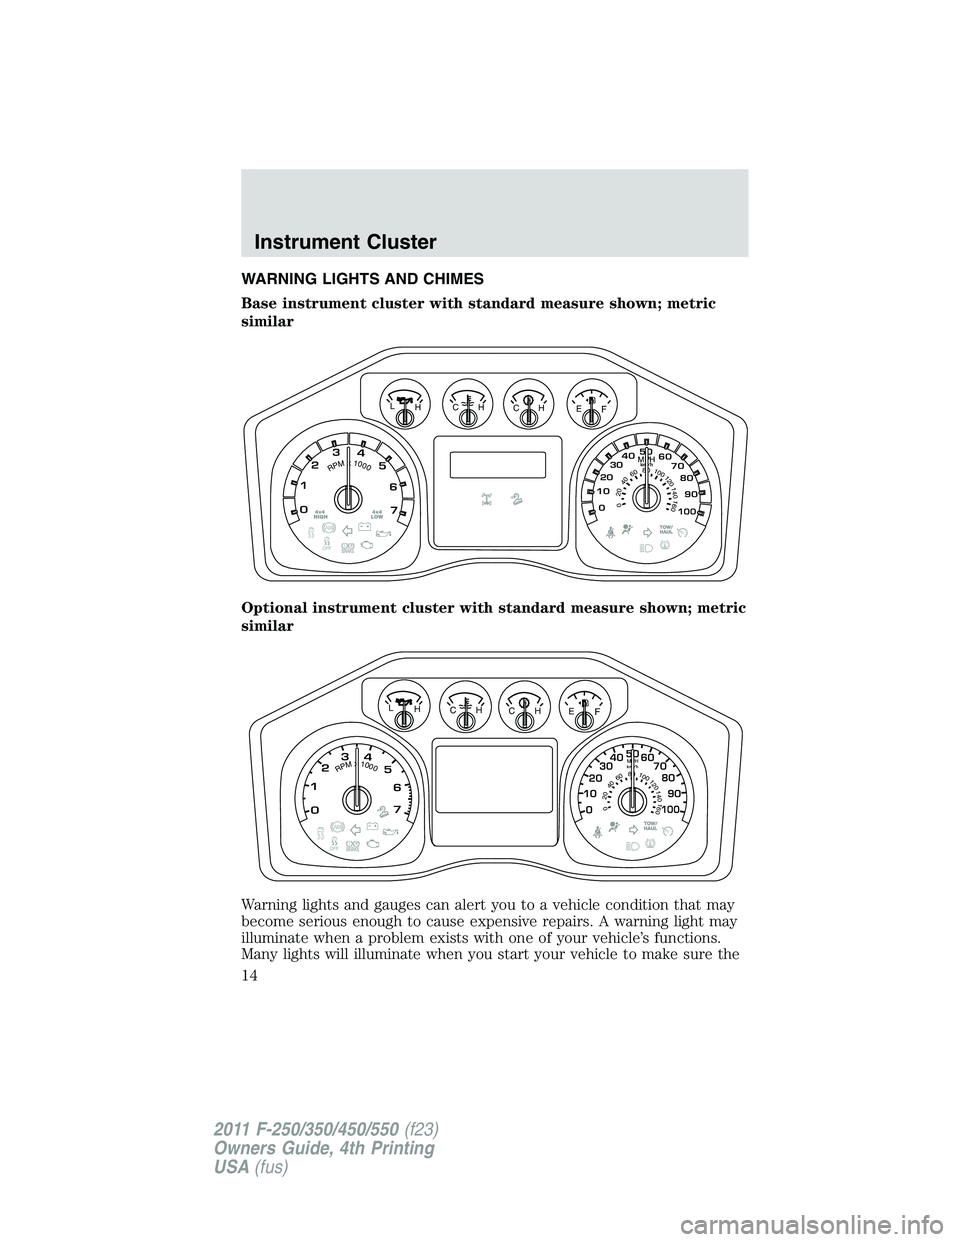 FORD F250 SUPER DUTY 2011  Owners Manual WARNING LIGHTS AND CHIMES
Base instrument cluster with standard measure shown; metric
similar
Optional instrument cluster with standard measure shown; metric
similar
Warning lights and gauges can aler